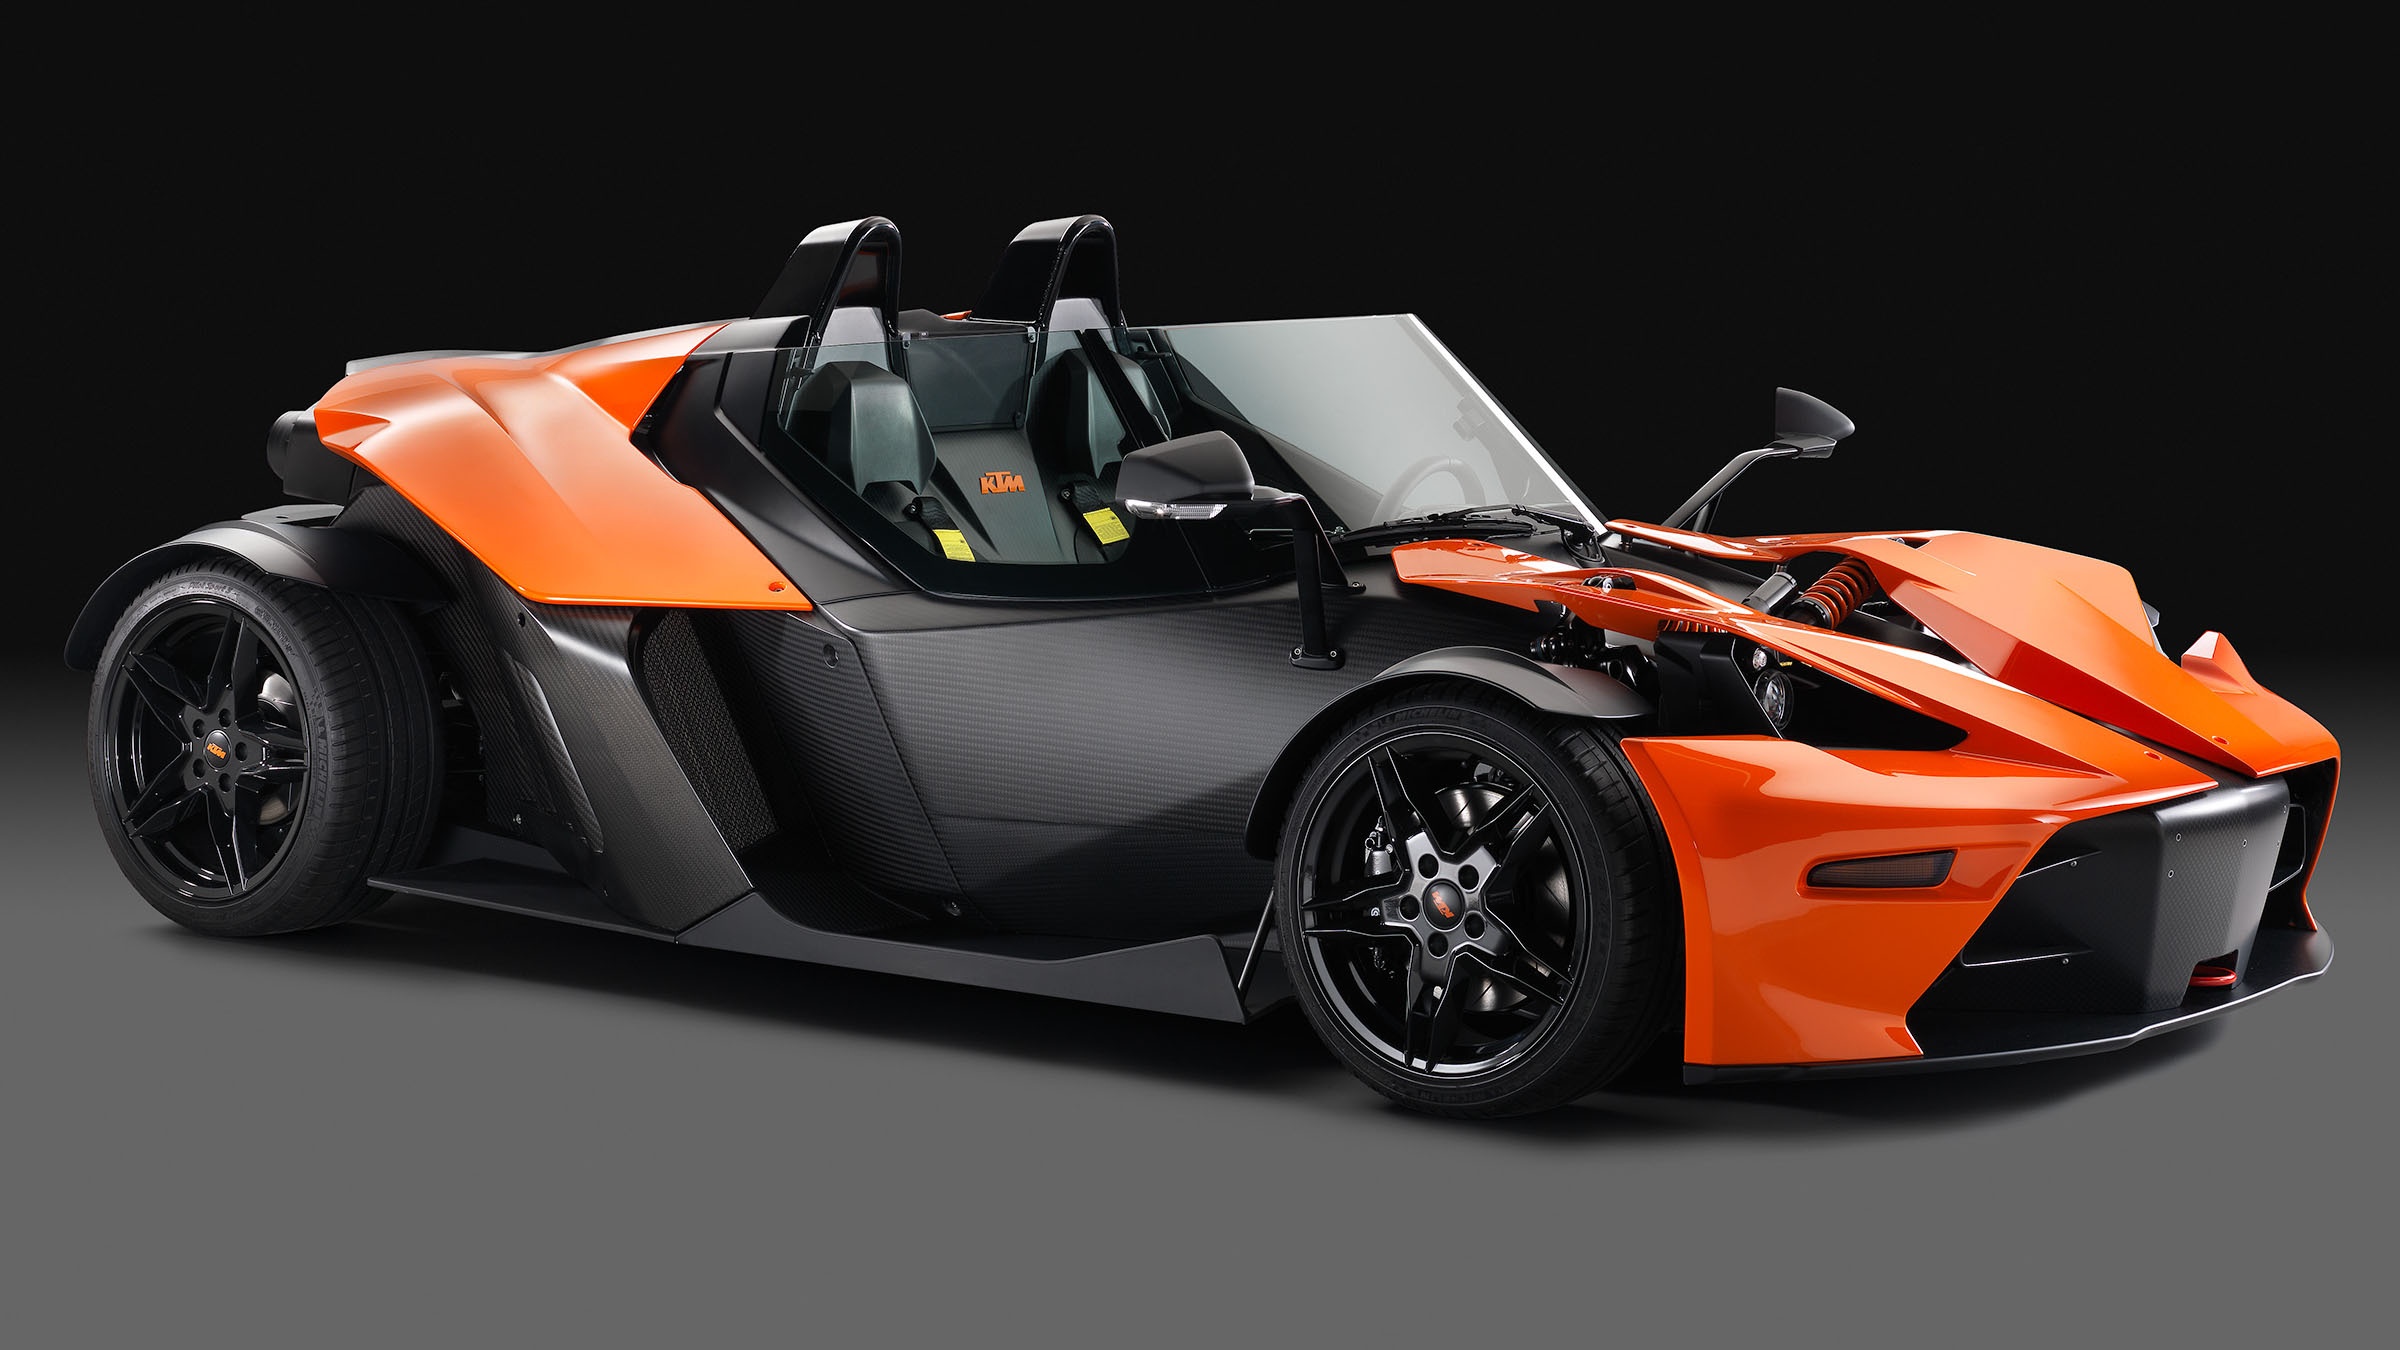 KTM X-Bow GT 2017 wallpaper | bikes and motorcycles | Wallpaper Better